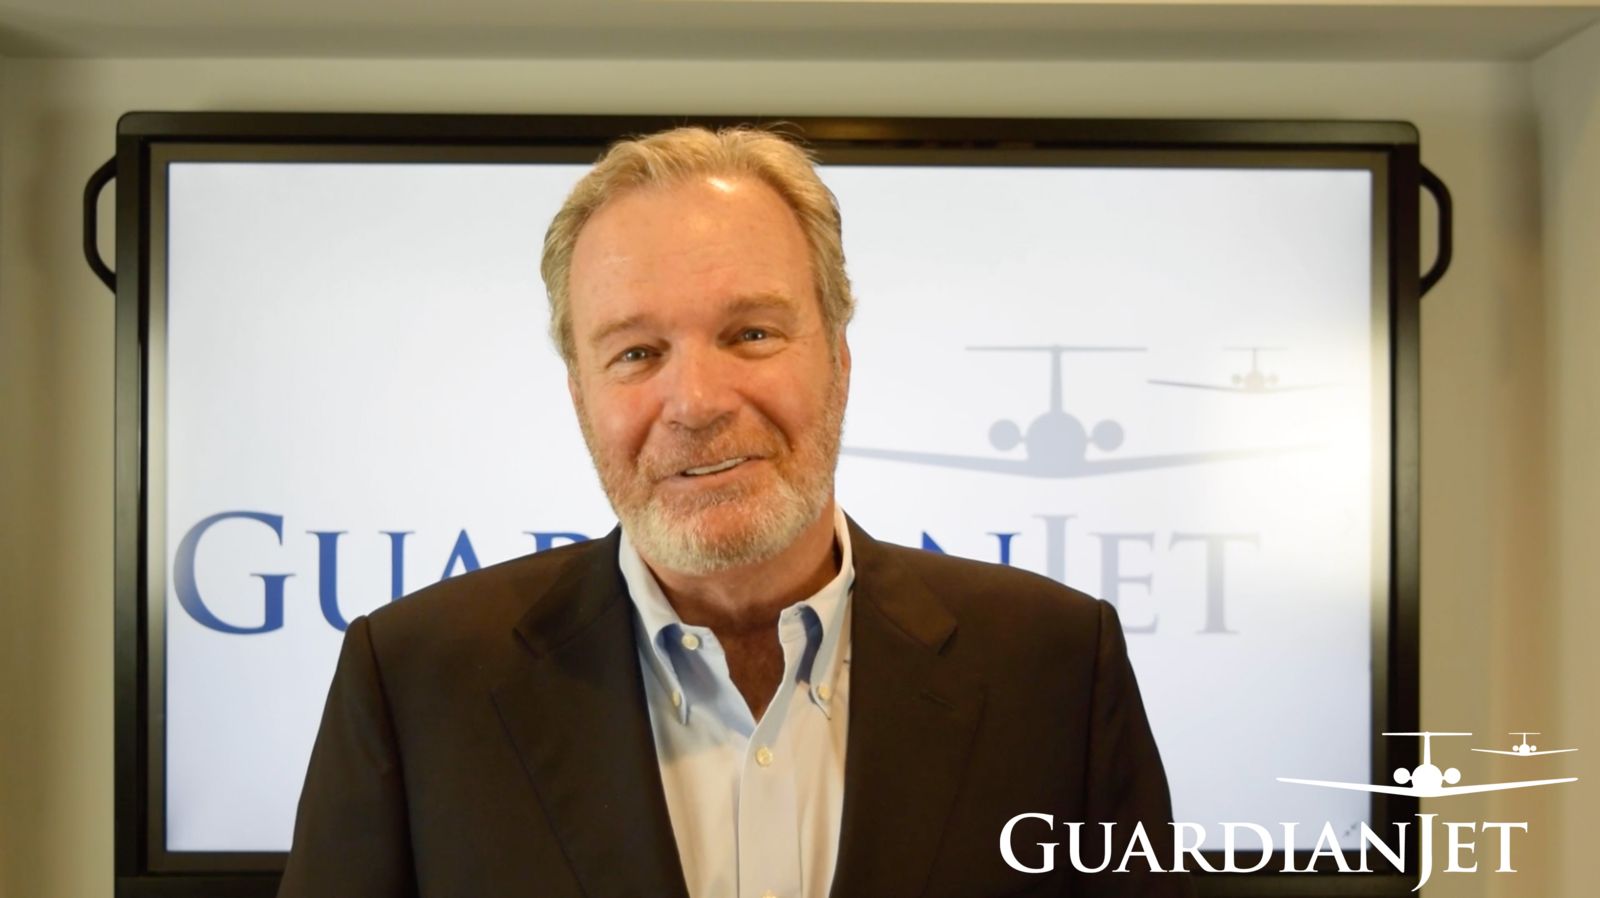 Guardian Jet Business Aviation Market Update with Don Dwyer - April 2022 - video